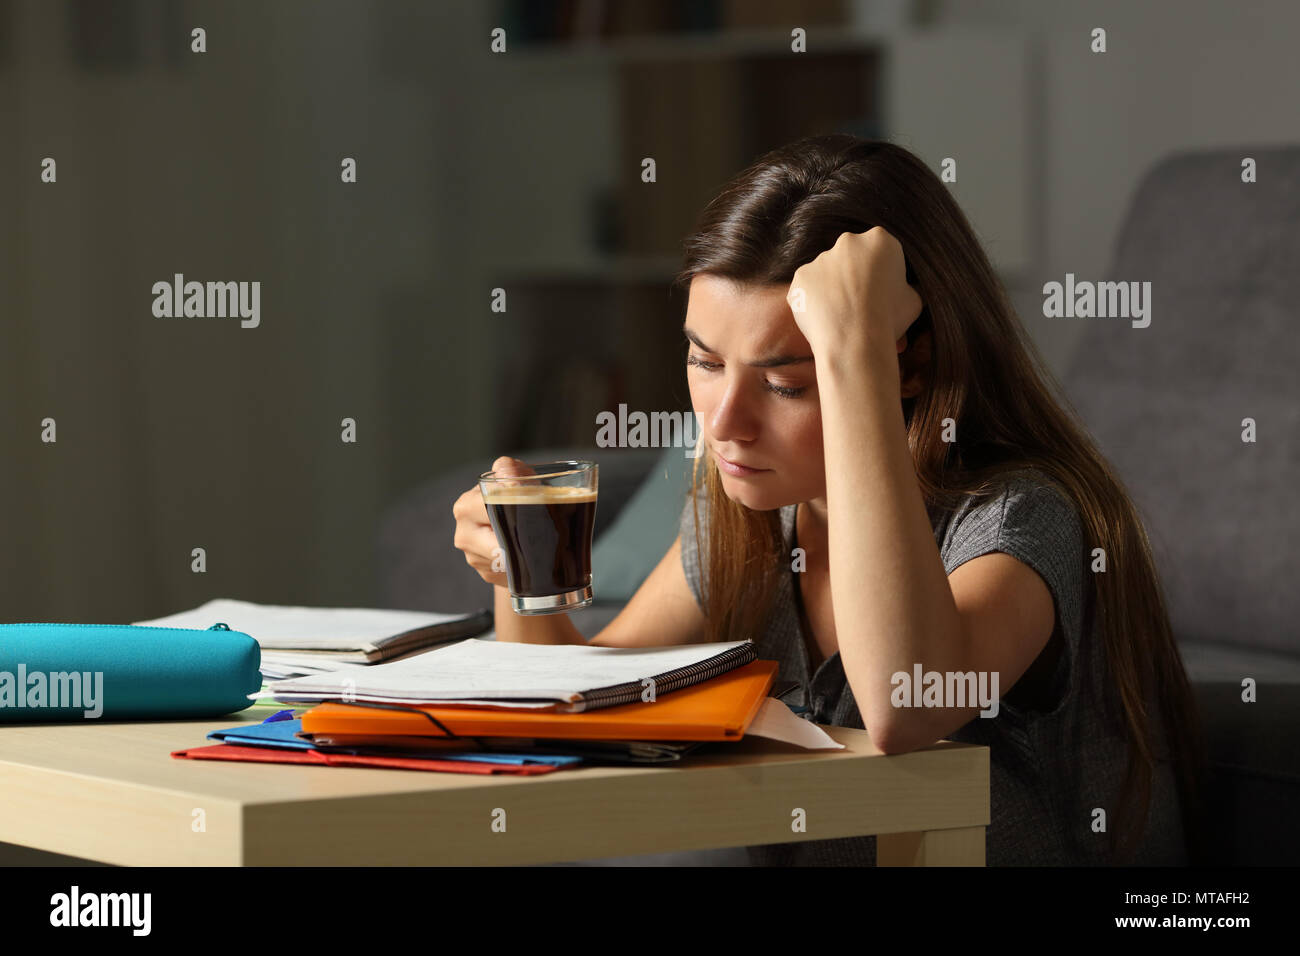 Tired student studying hard late hours drinking coffee at home Stock Photo